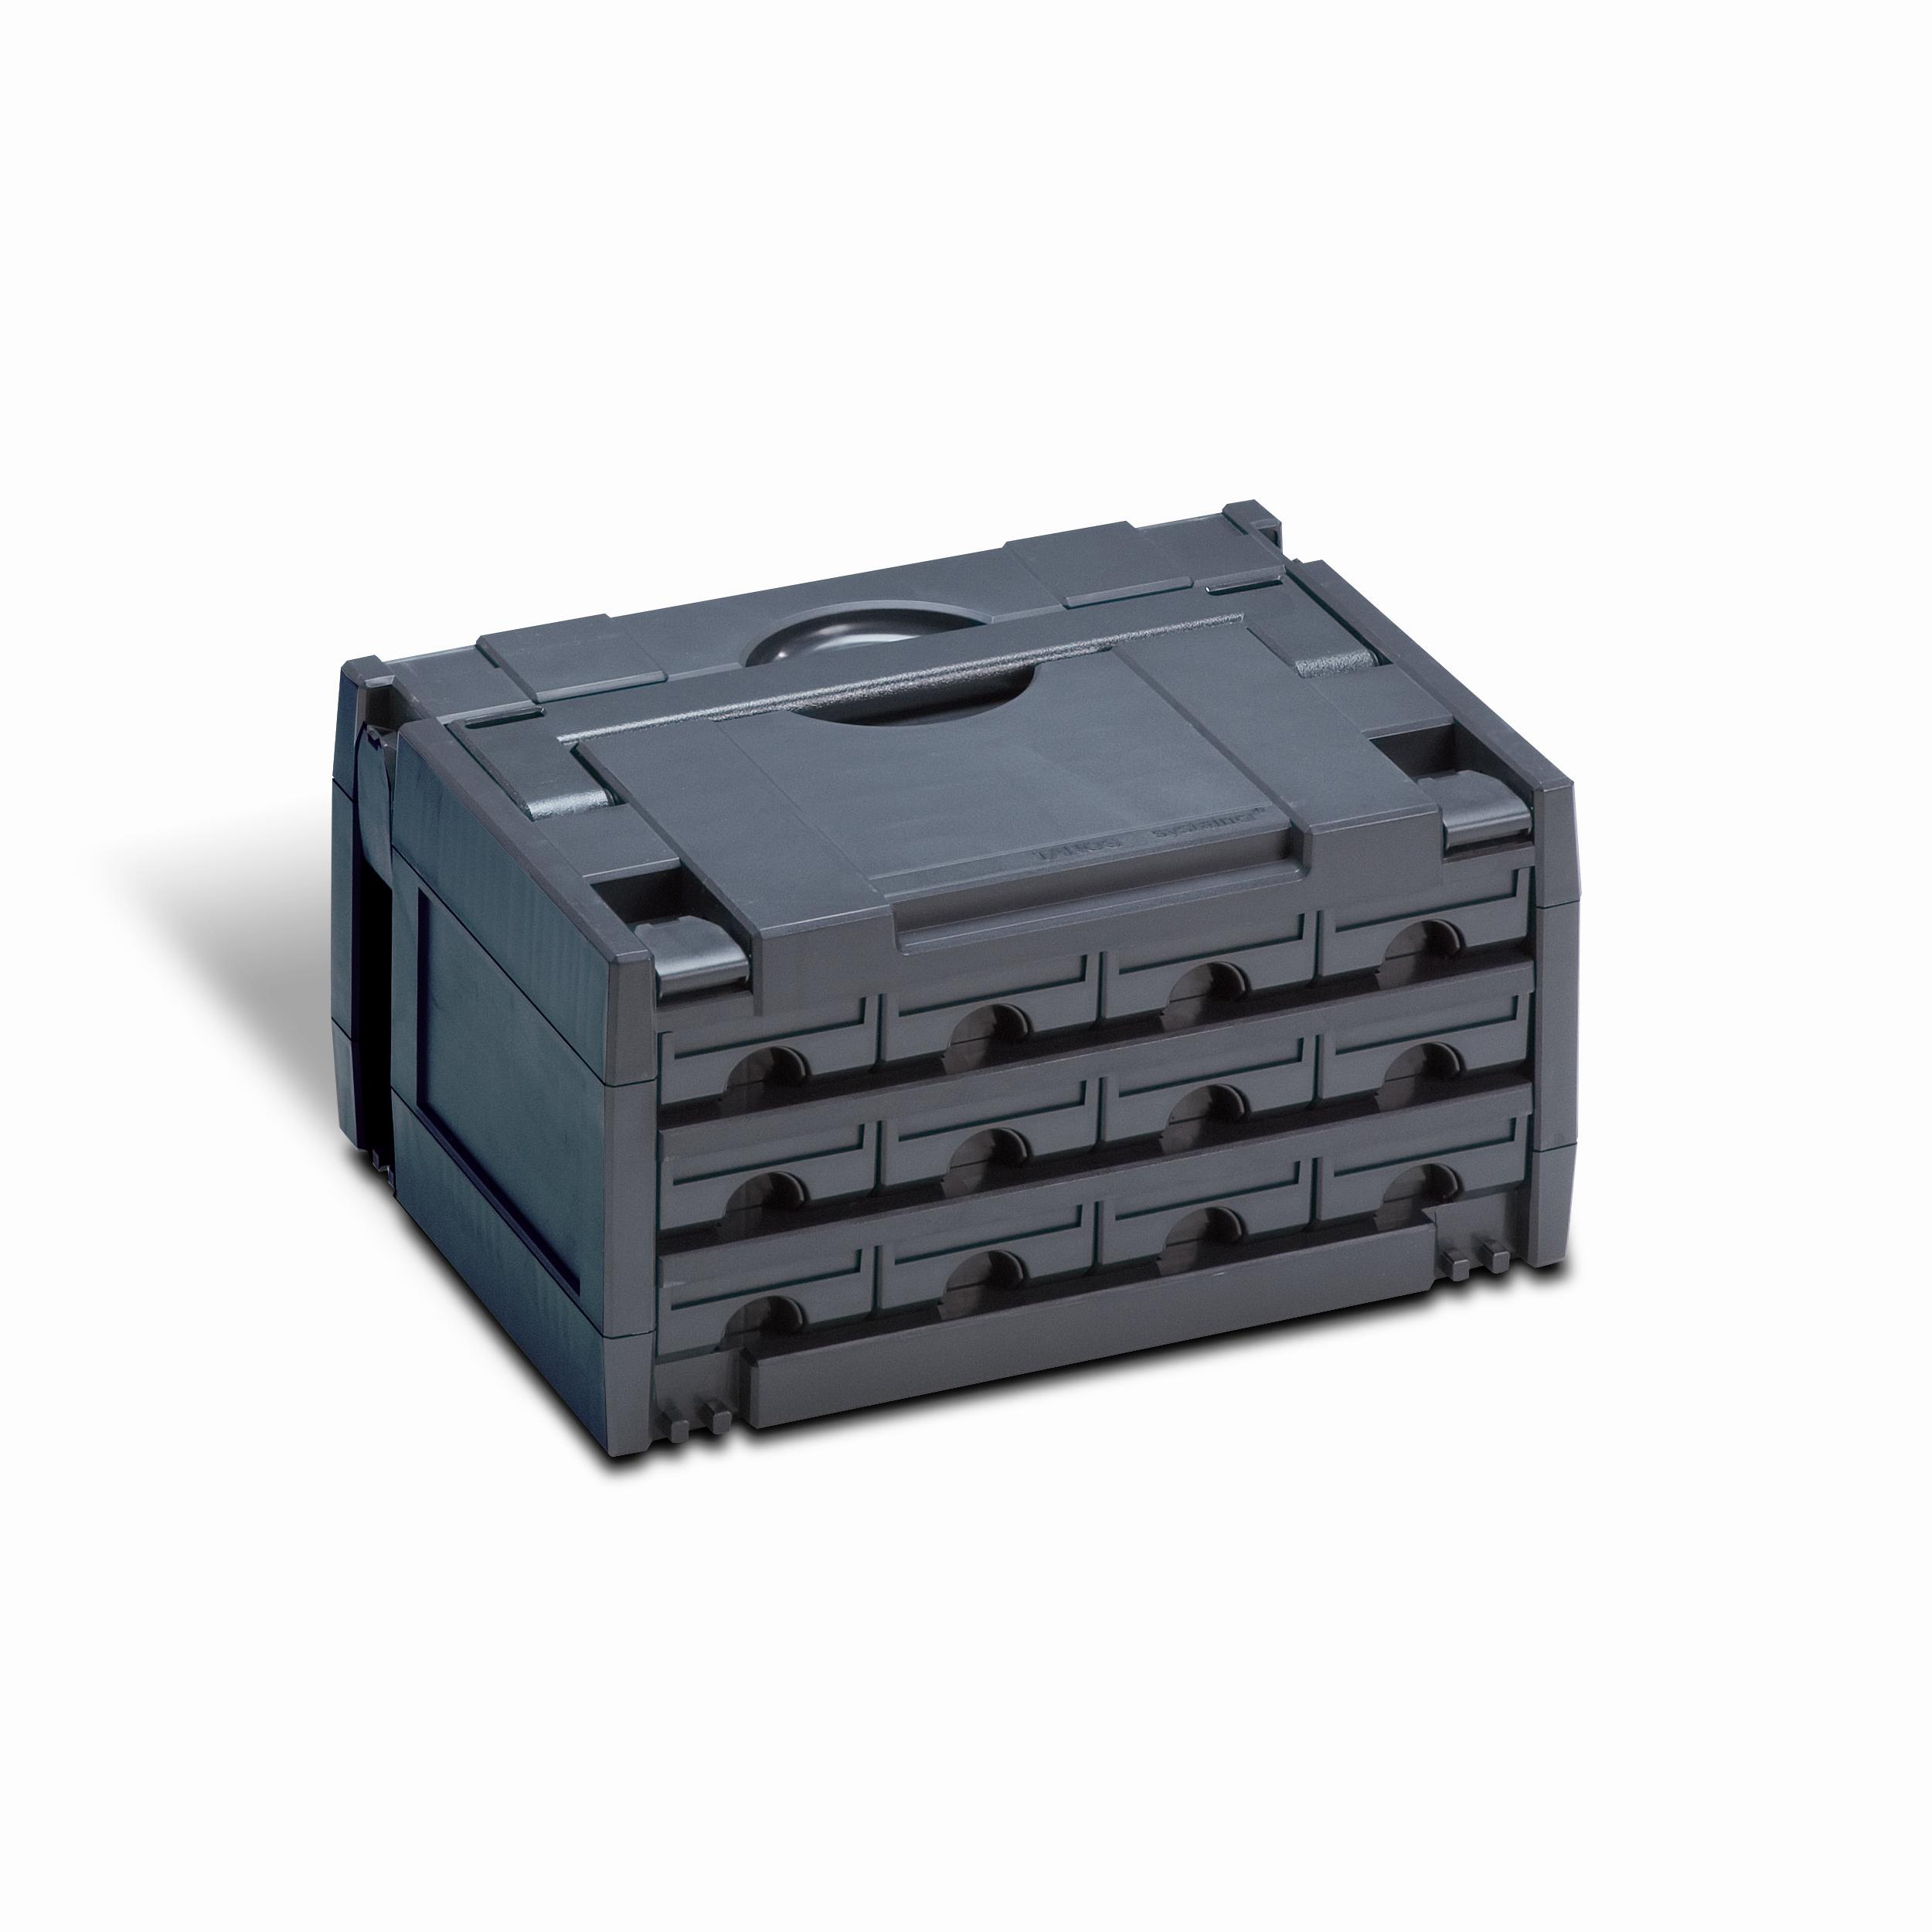 Drawer-systainer Iii - Variant 3 Anthracite